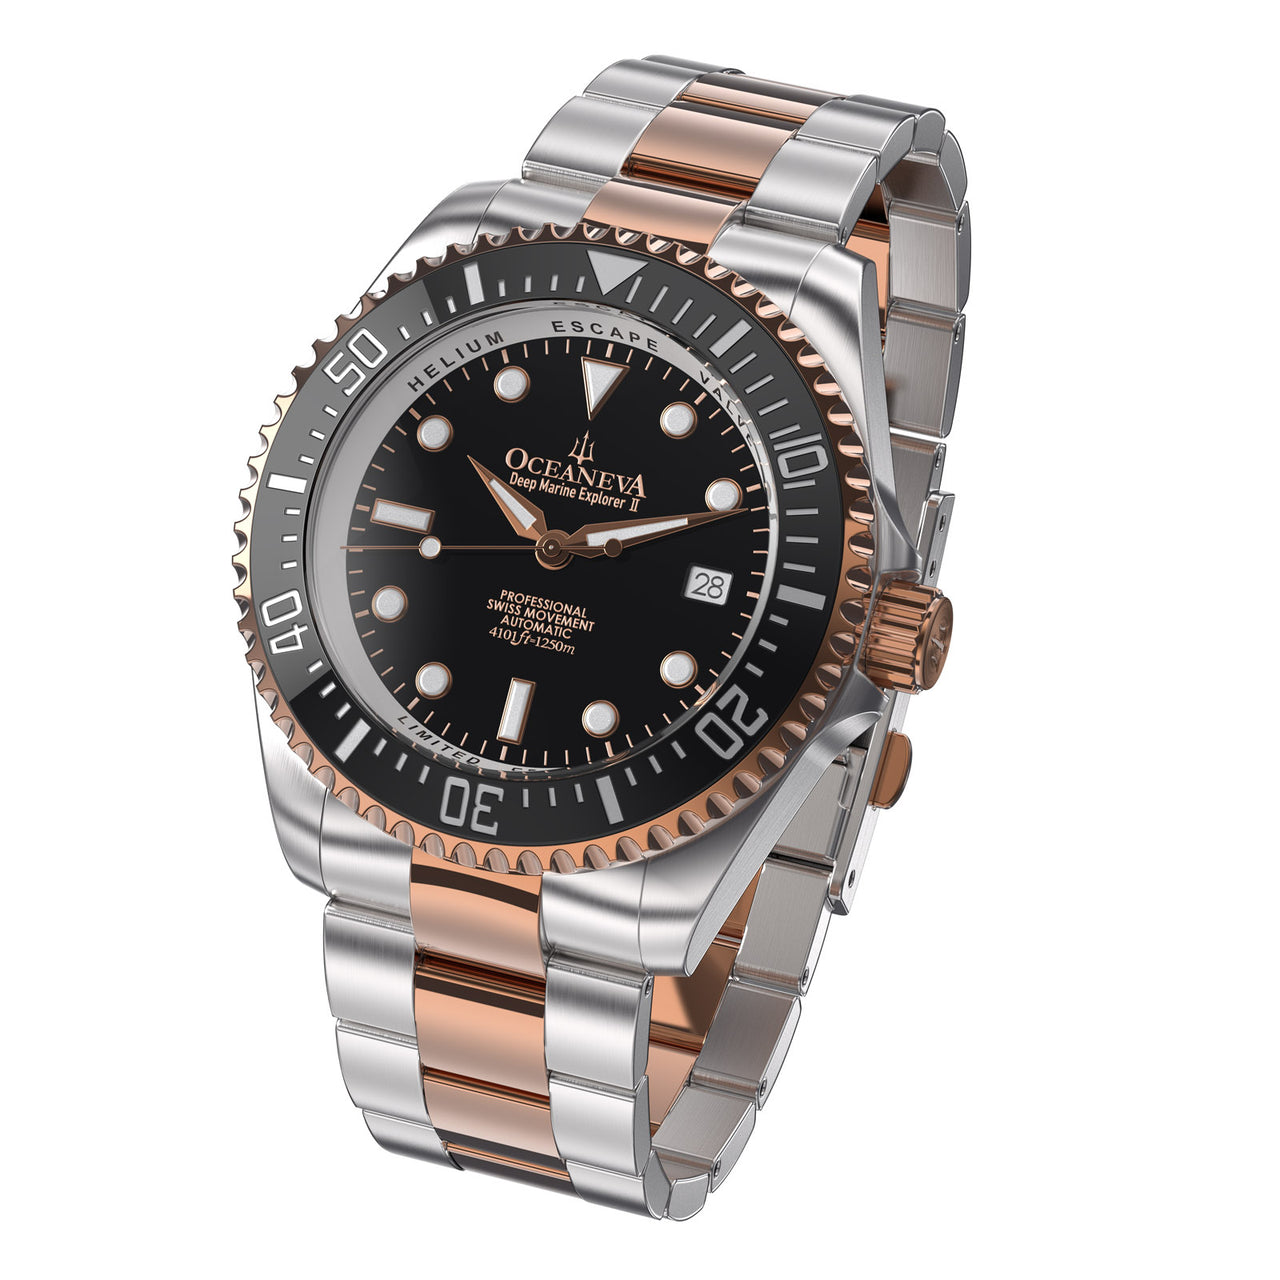 Oceaneva 1250M Dive Watch Black And Rose Gold Front Picture Slight Left Slant View